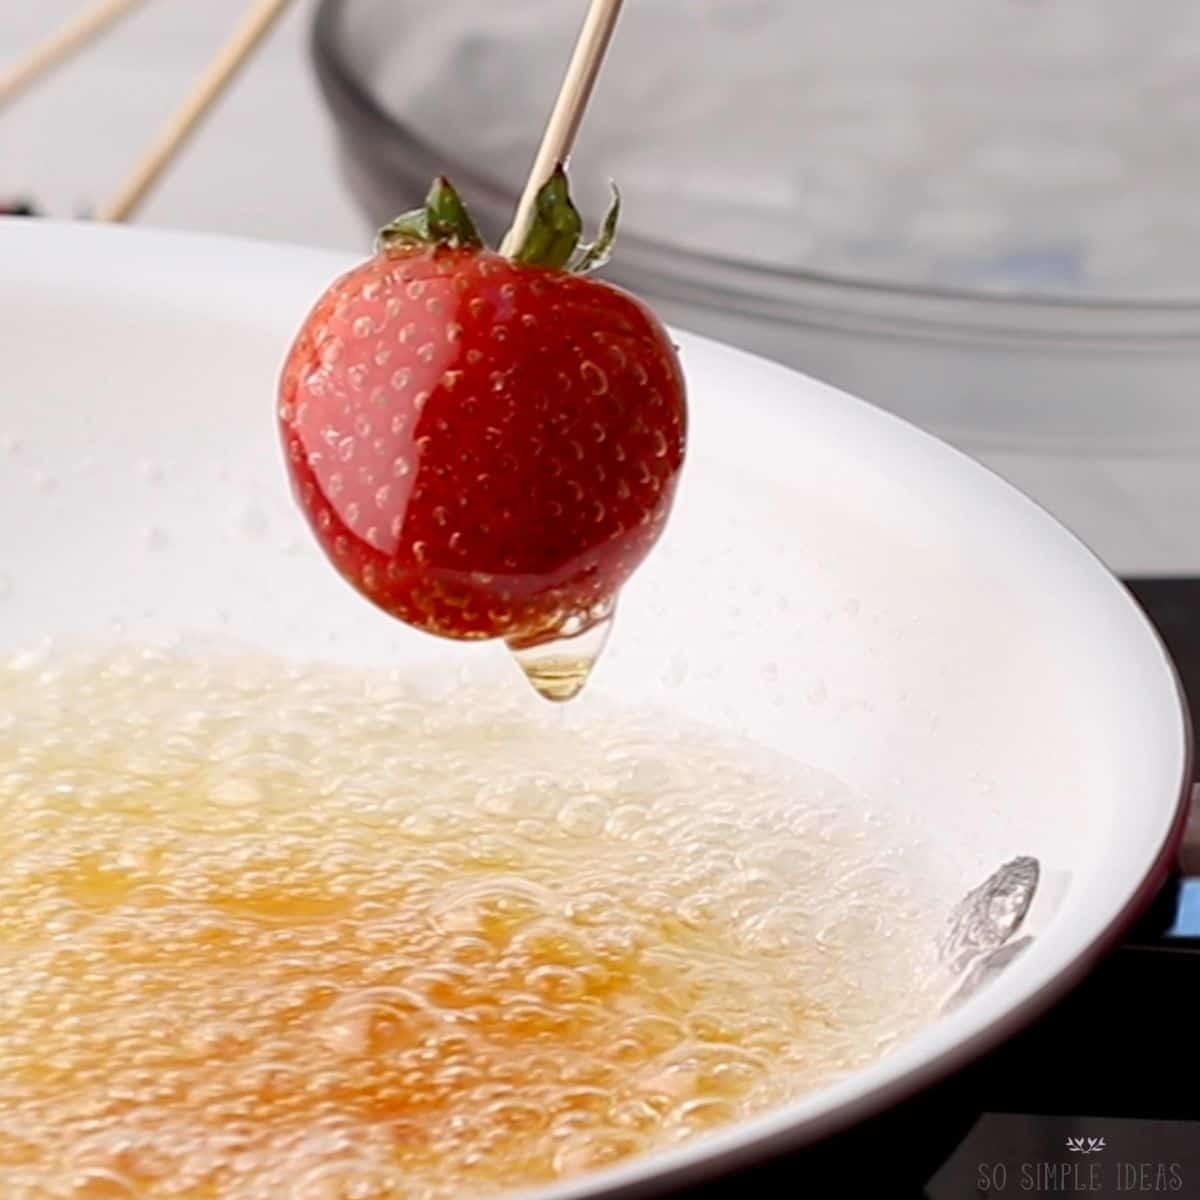 removing skewered strawberry from hot candy syrup.